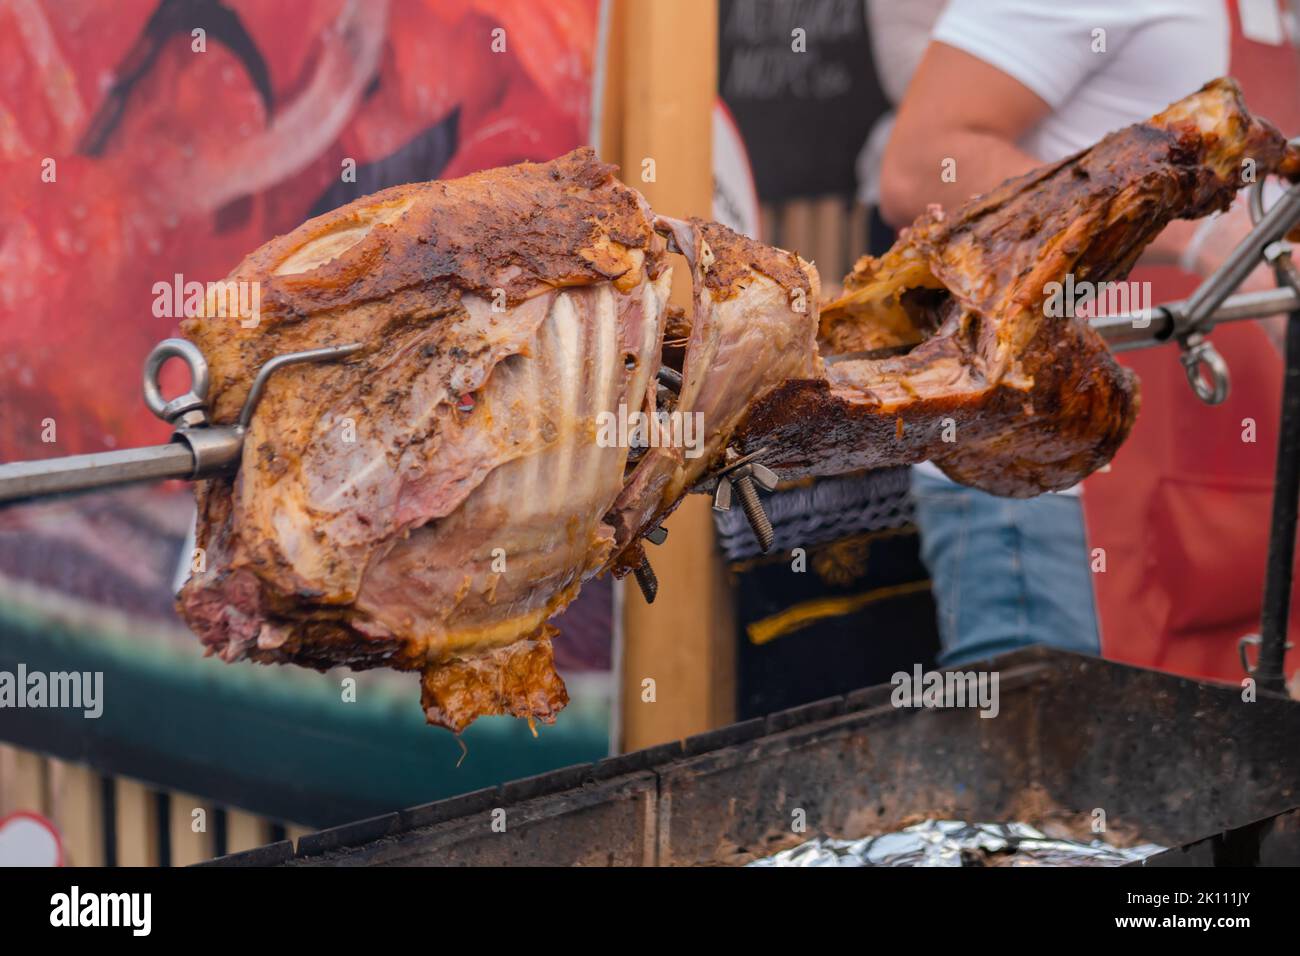 Process of cooking pork on spit at summer street food market Stock Photo